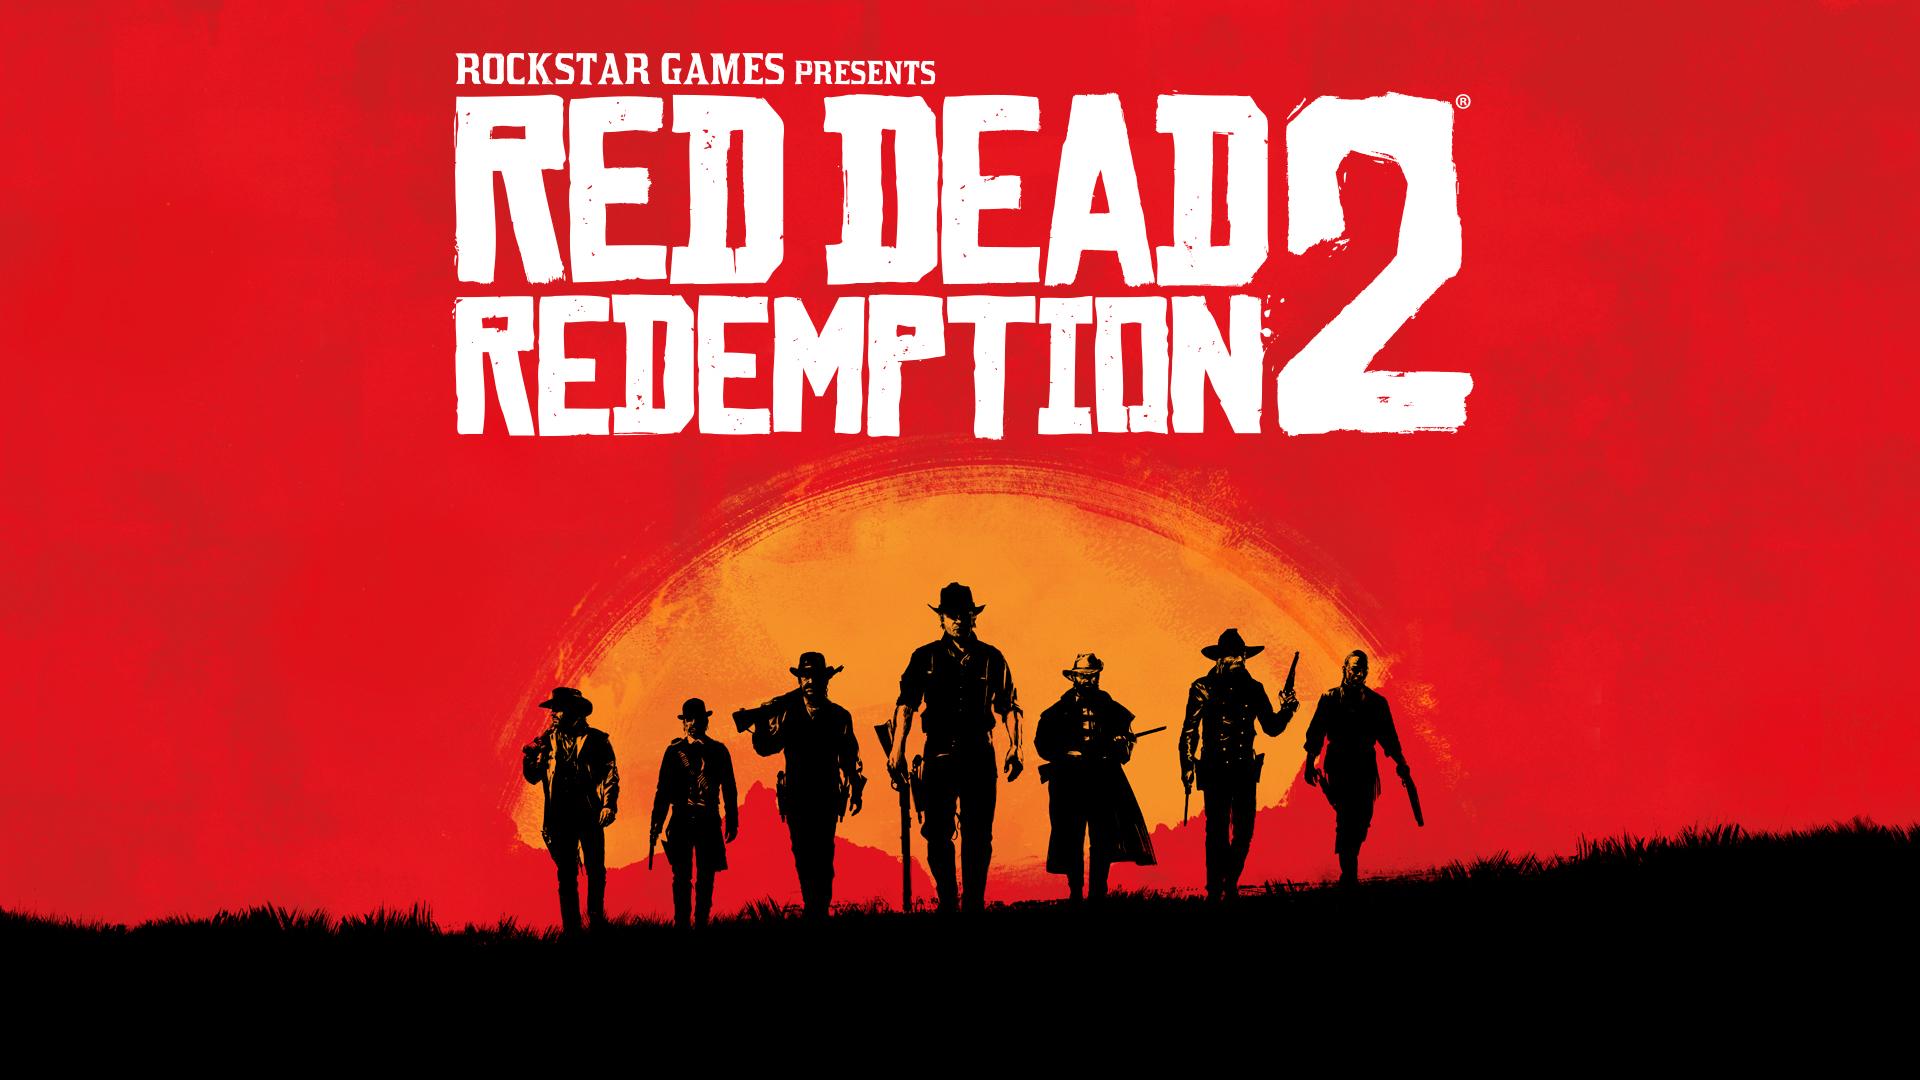 beundring logik udeladt GameStop on Twitter: "Pre-order Red Dead Redemption 2 at GameStop for #PS4  or #XboxOne https://t.co/tTvd9gSAeh https://t.co/pC7AqDvCRf" / Twitter